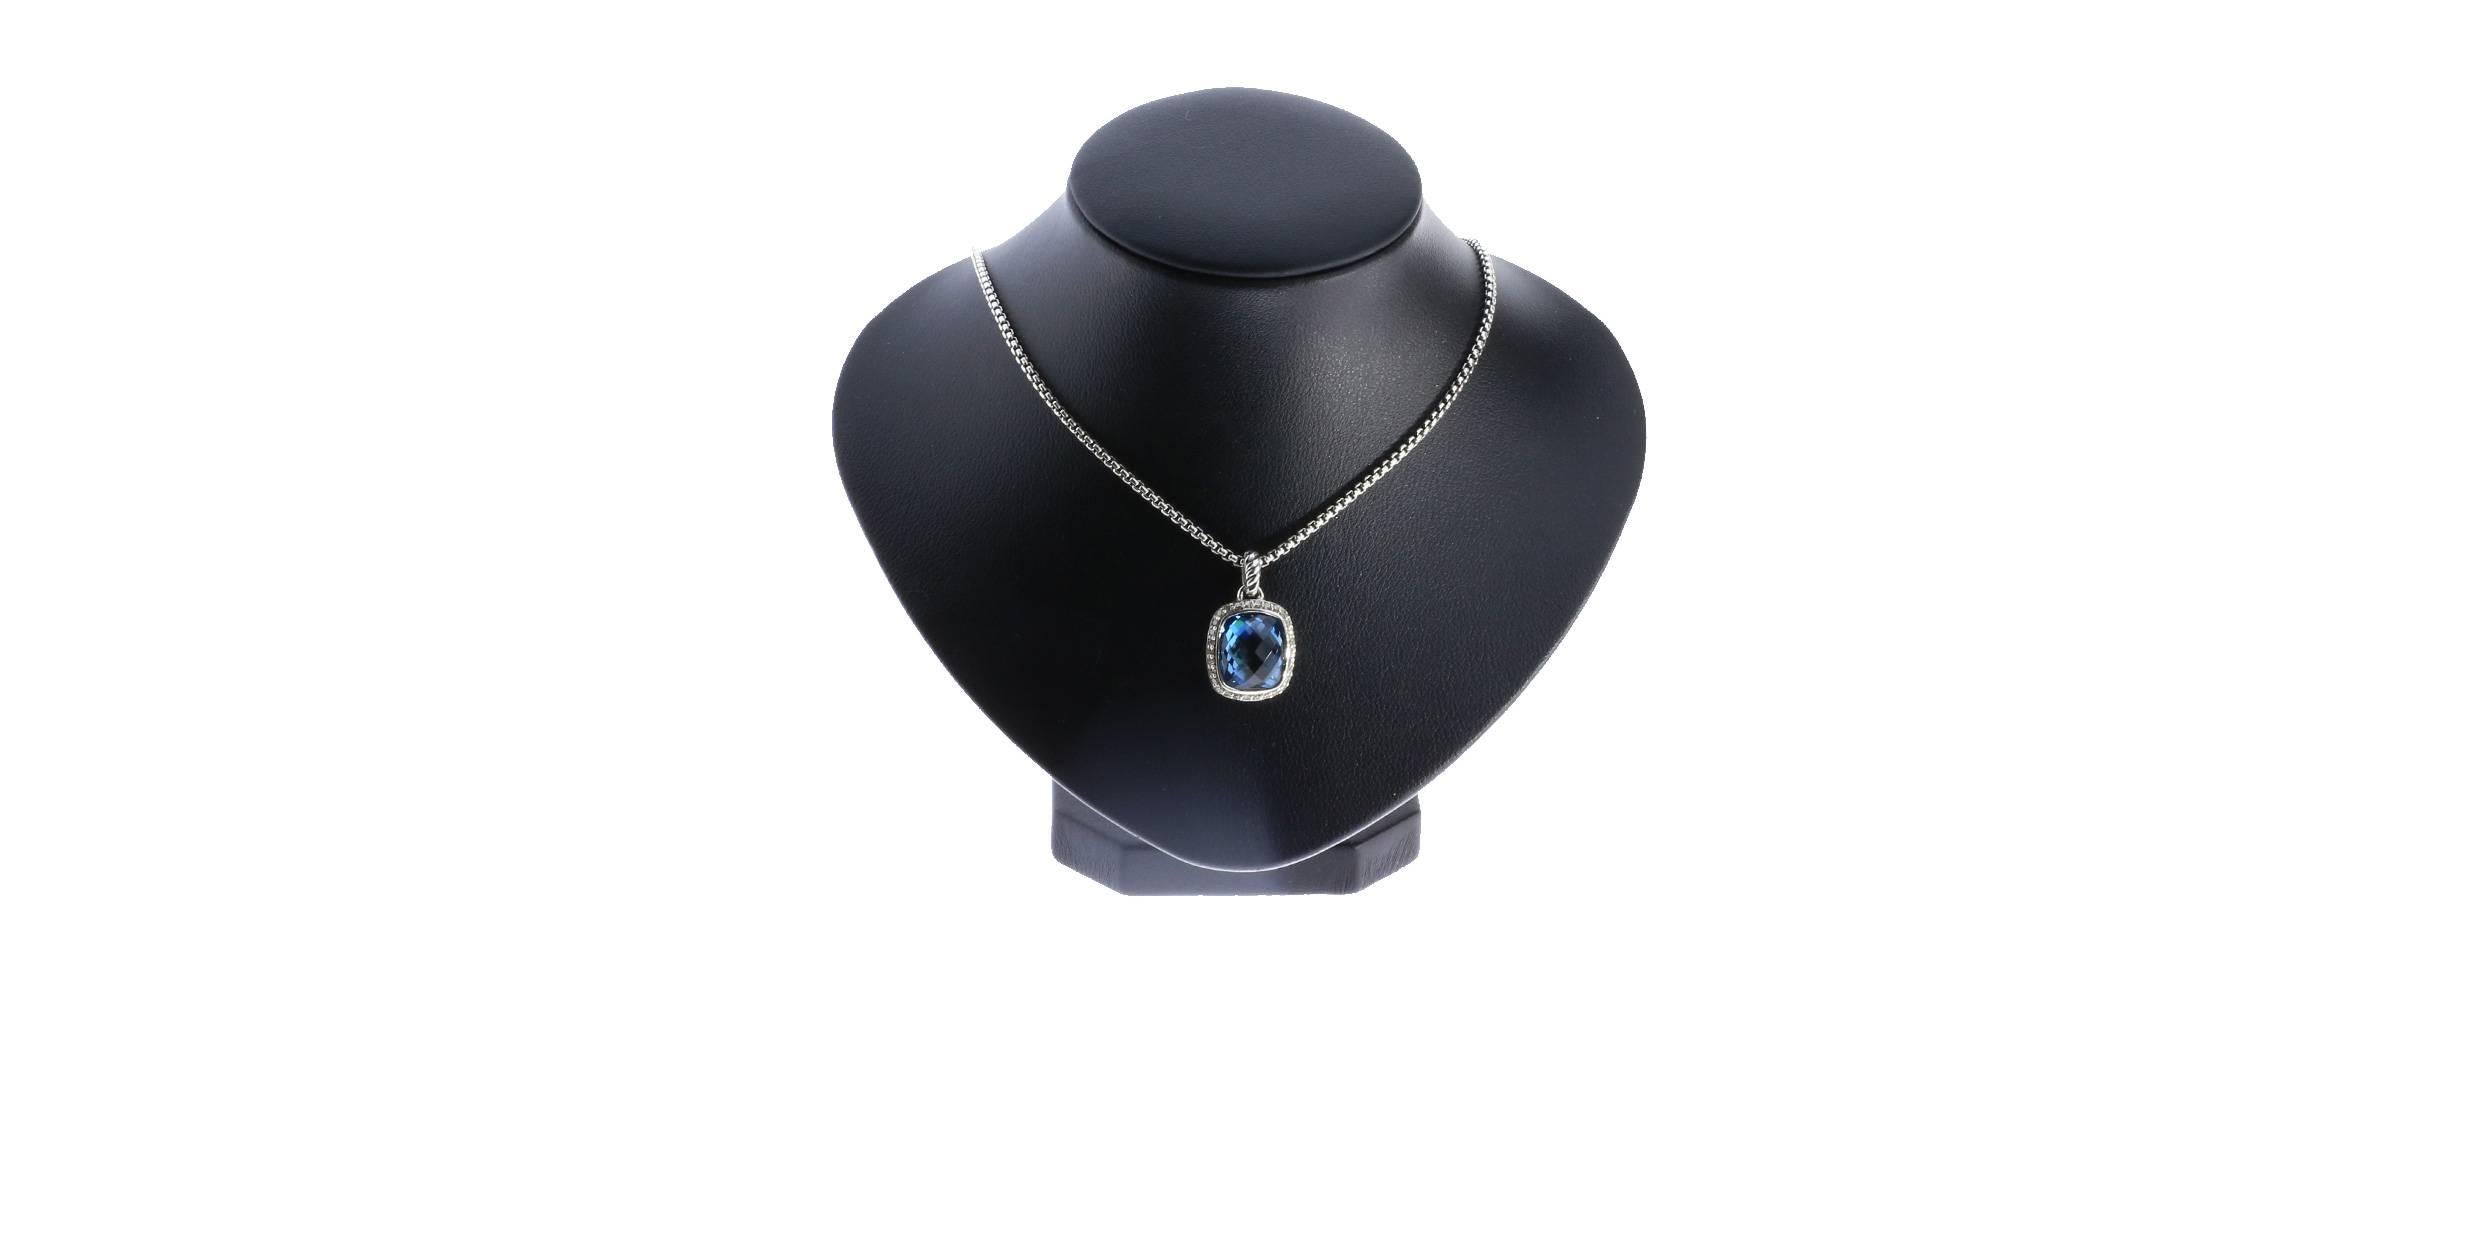 This pendant necklace is from the Noblesse collection by David Yurman. The center stone is a gorgeous, checkerboard faceted, cushion cut blue topaz that is surrounded by a halo of diamonds with a total weight of .25 carat. The bail has a touch of